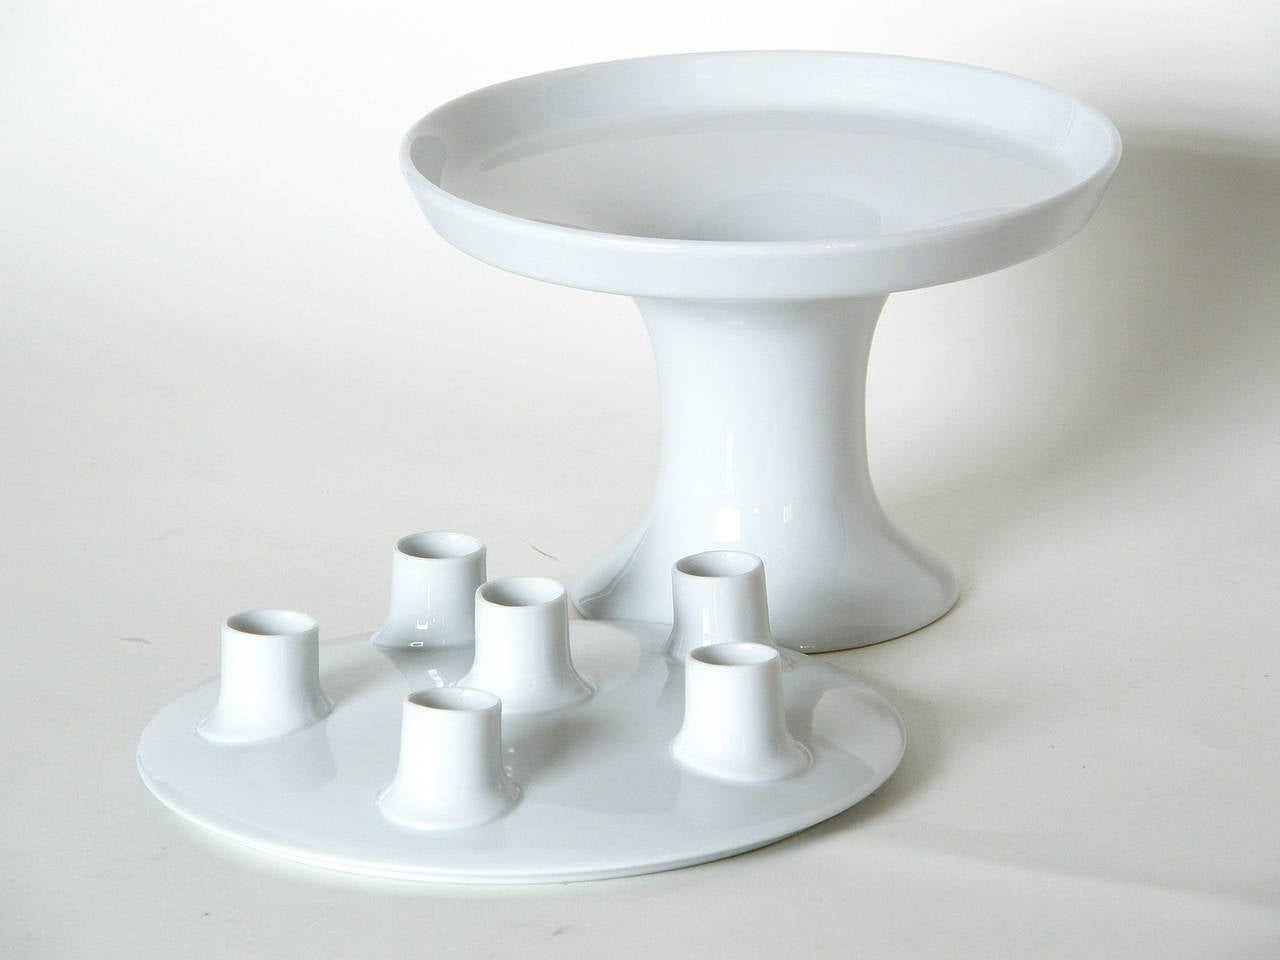 This porcelain centerpiece is part of the 